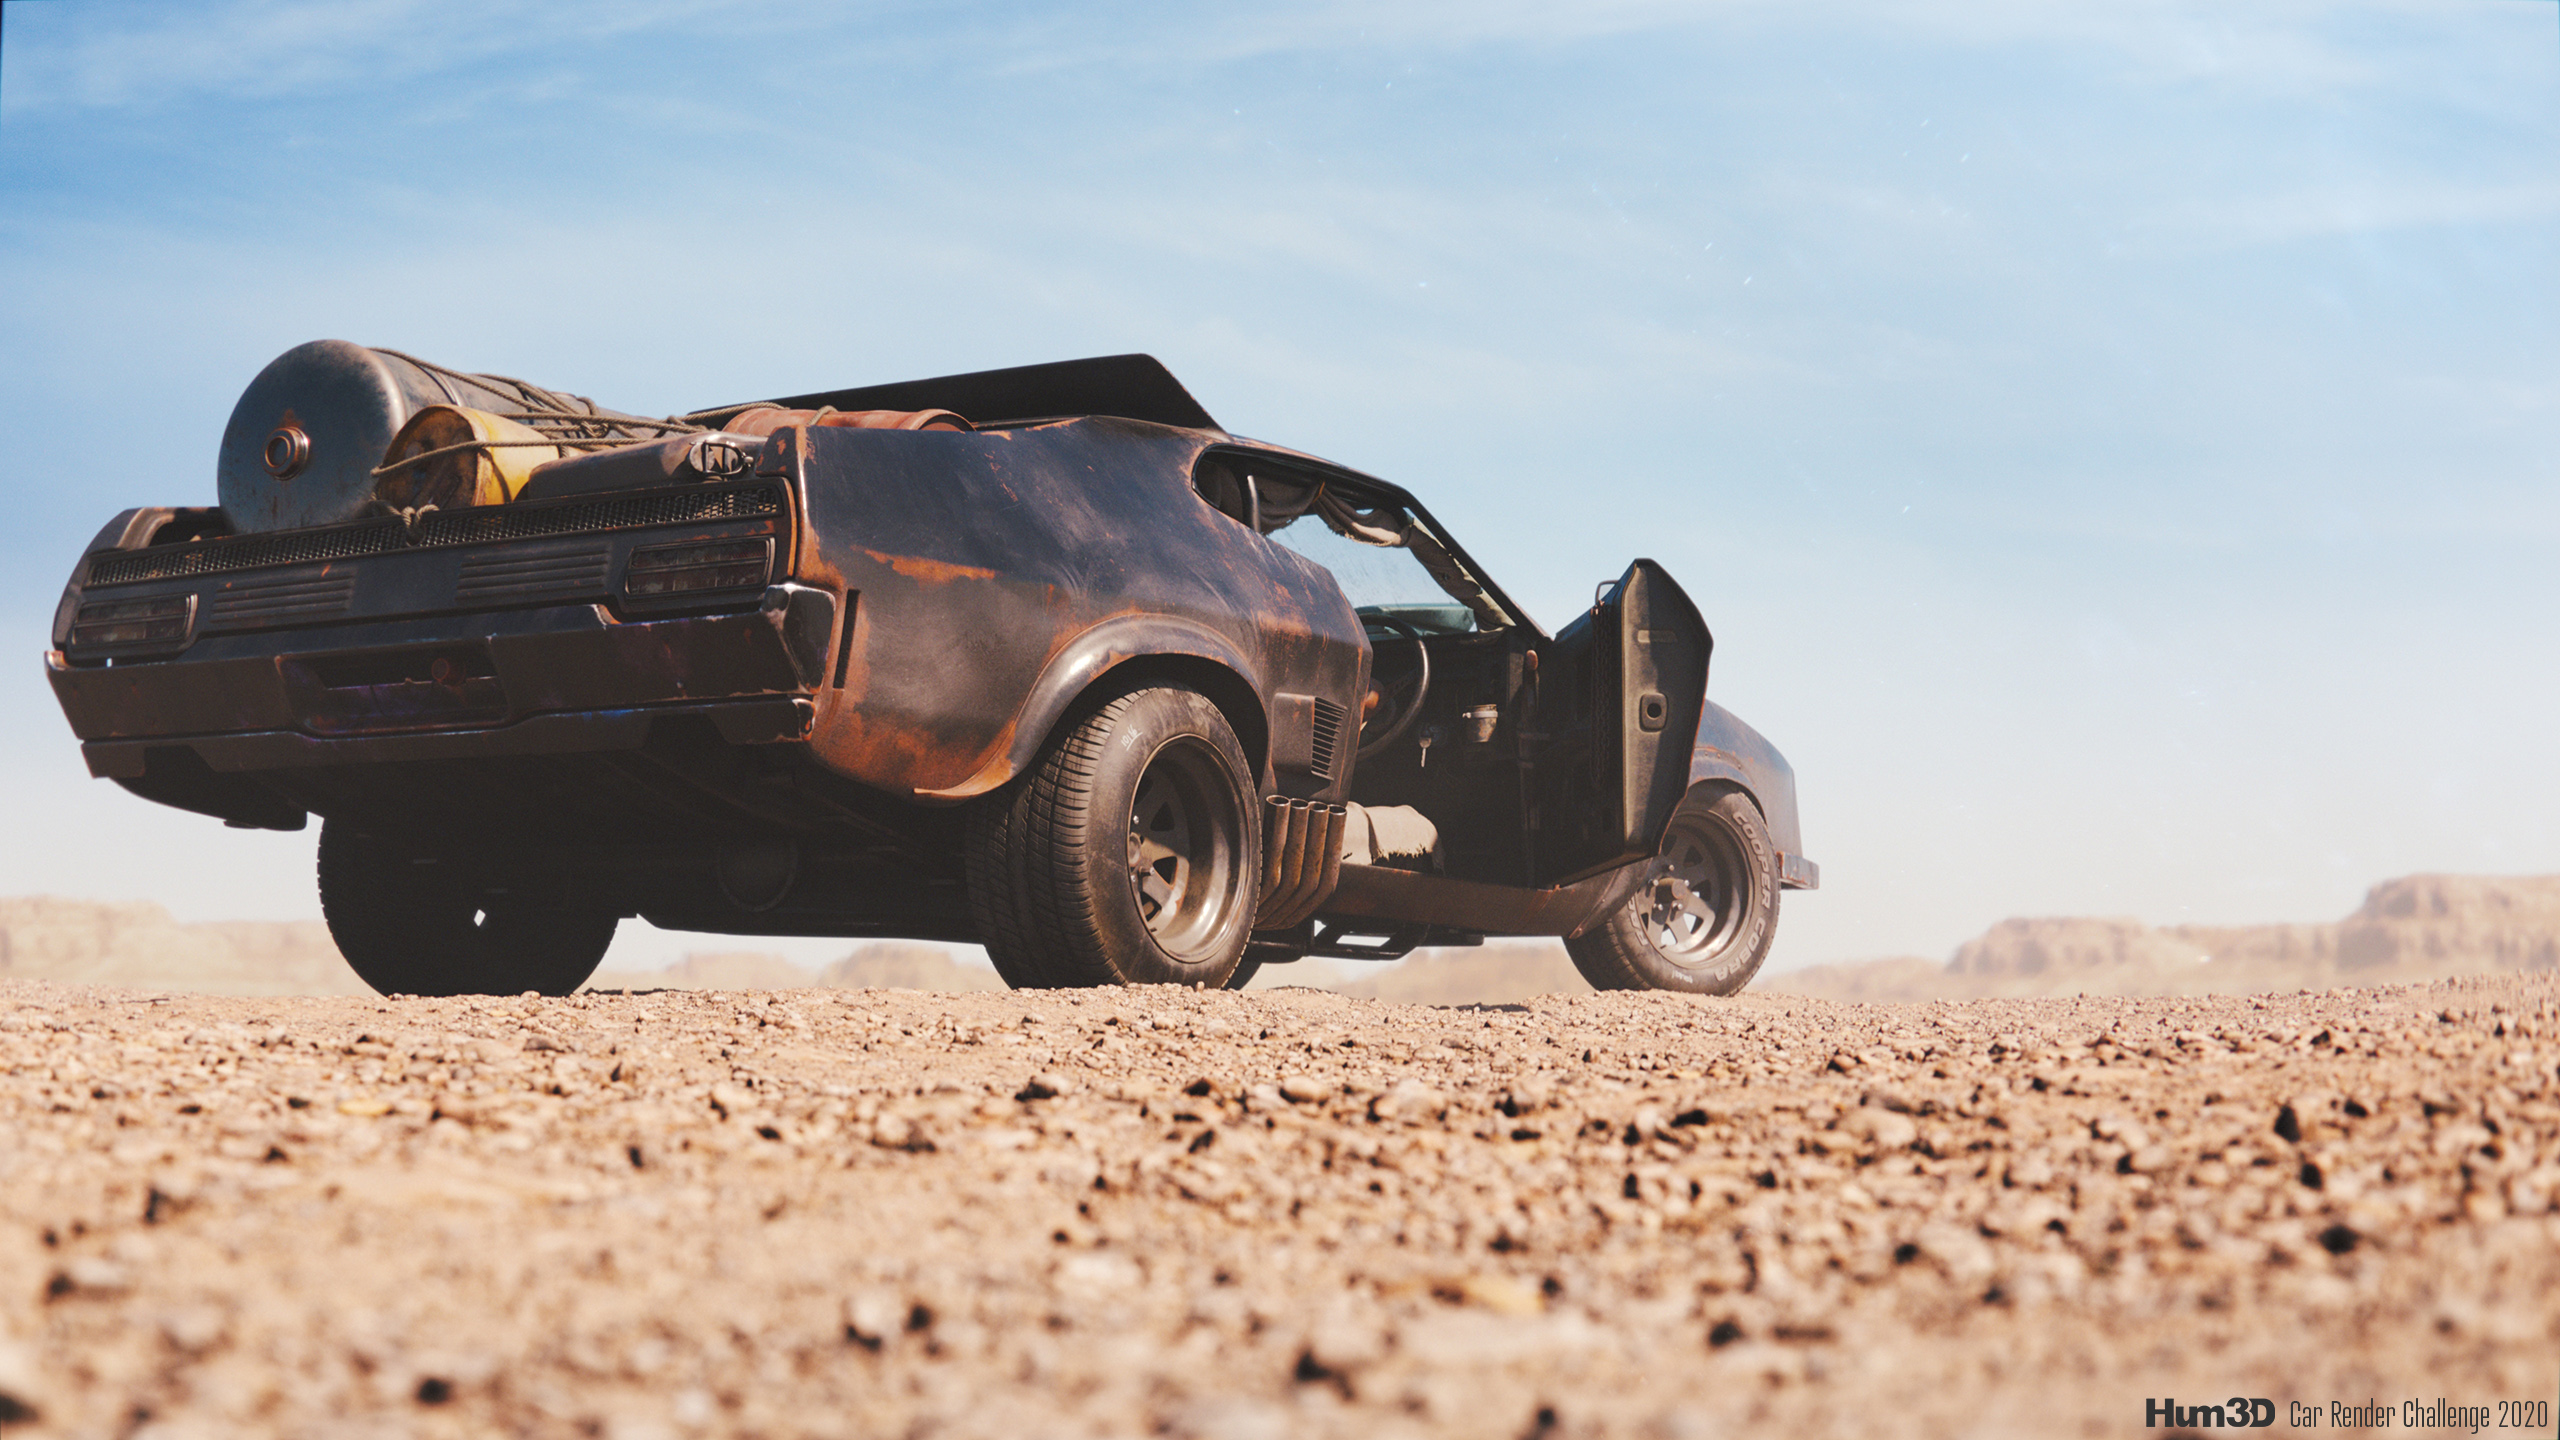 Ford Falcon XB GT – tribute to Mad Max